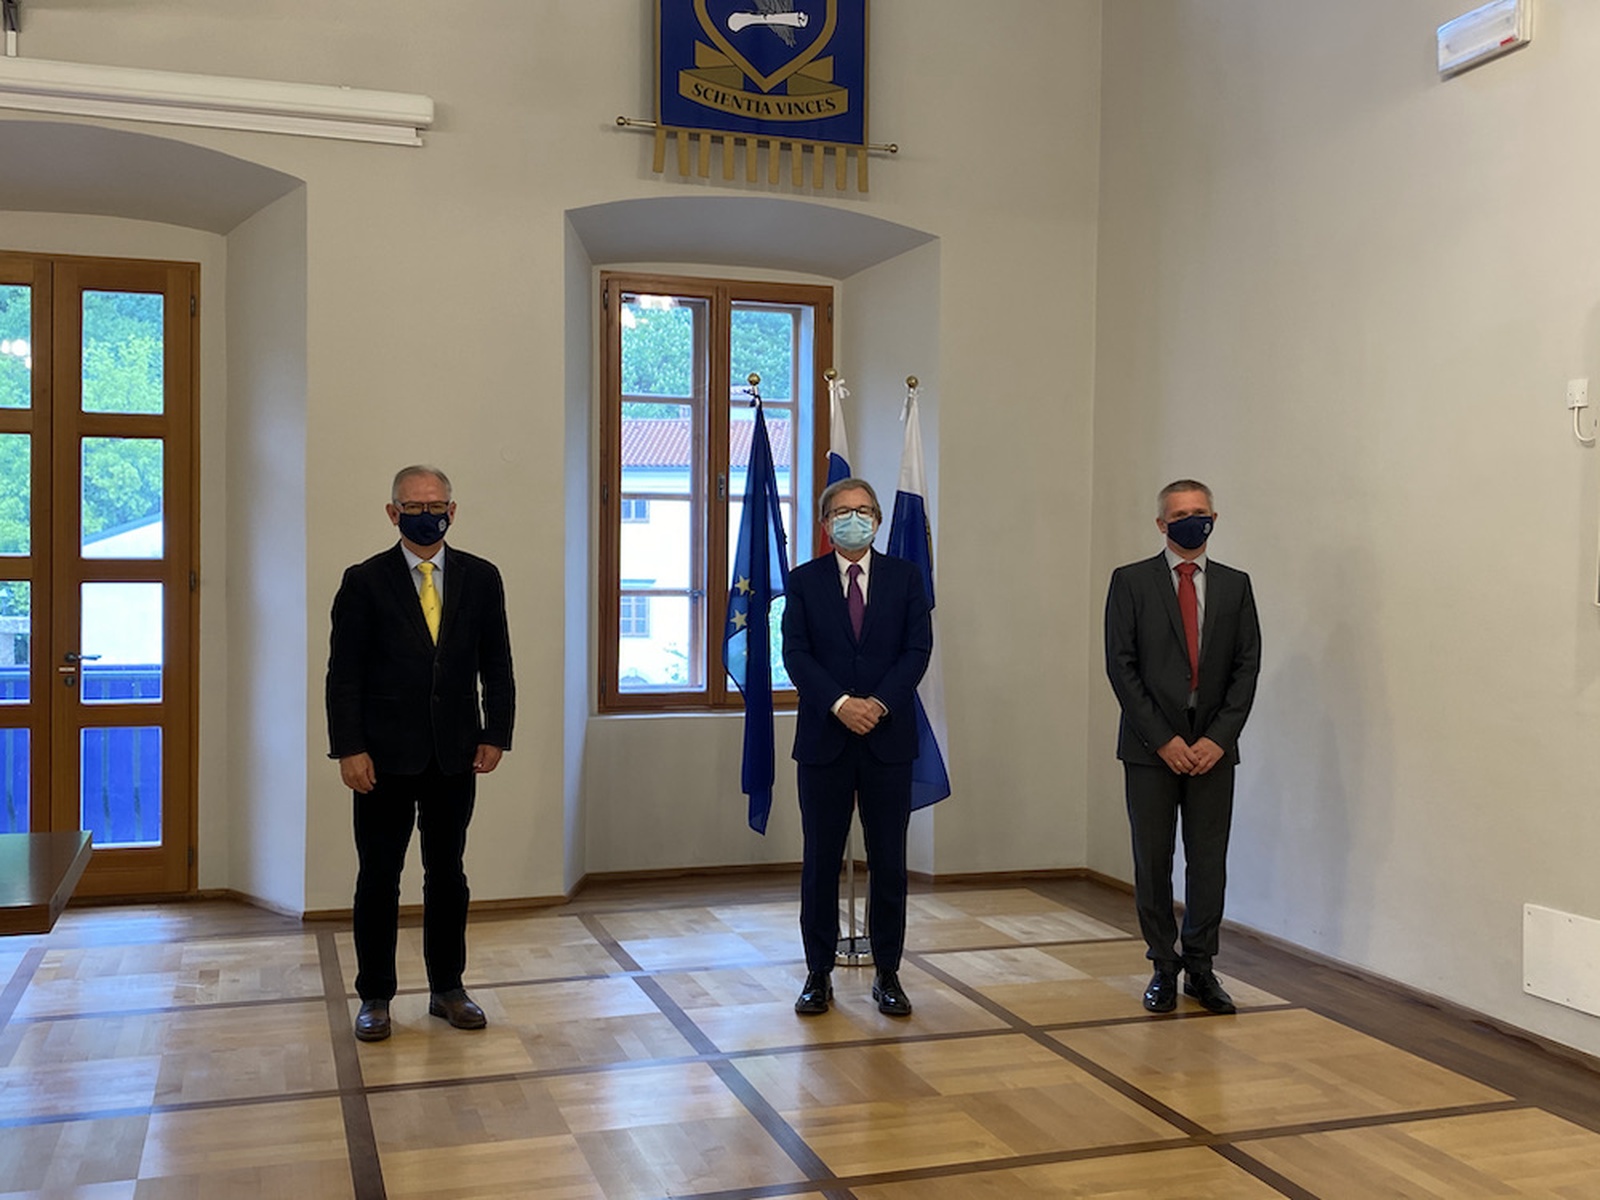 From left to right: Prof. Dr. Danilo Zavrtanik, Rector of the University of Nova Gorica, His Excellency Mr Juan Aristegui Laborde, Ambassador of the Kingdom of Spain in the Republic of Slovenia and Prof. Dr. Samo Stanič, Head of the Centre for Astrophysics and Cosmology.